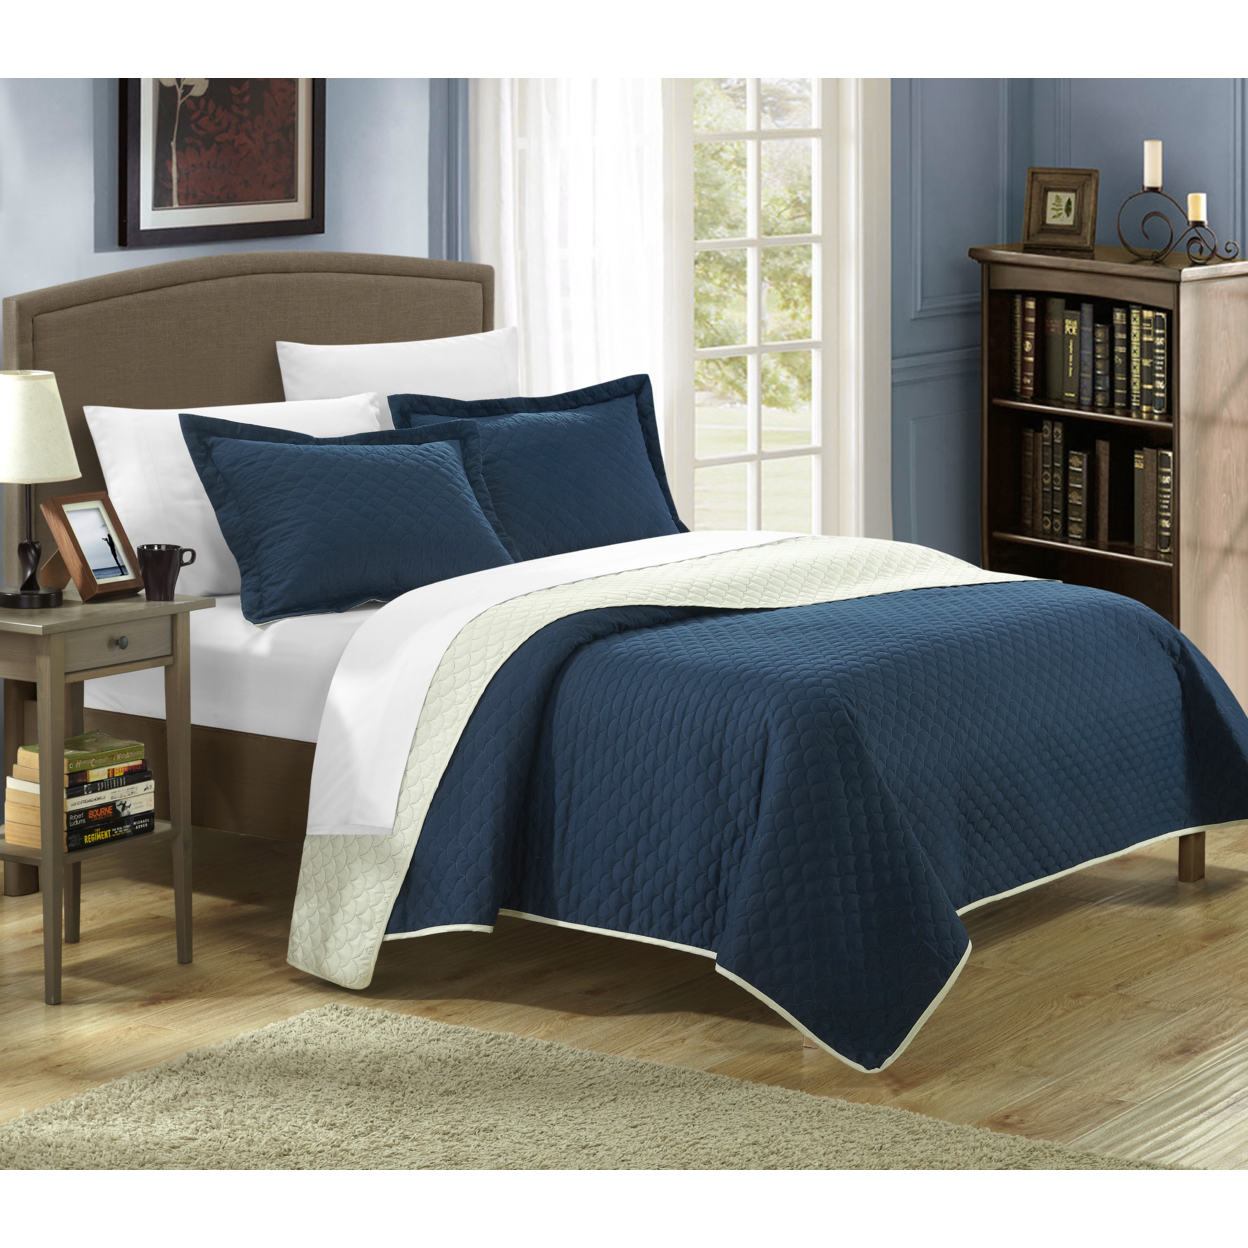 Lugano Reversible Color Block Modern Design Quilt With Shams Set - Navy, Twin